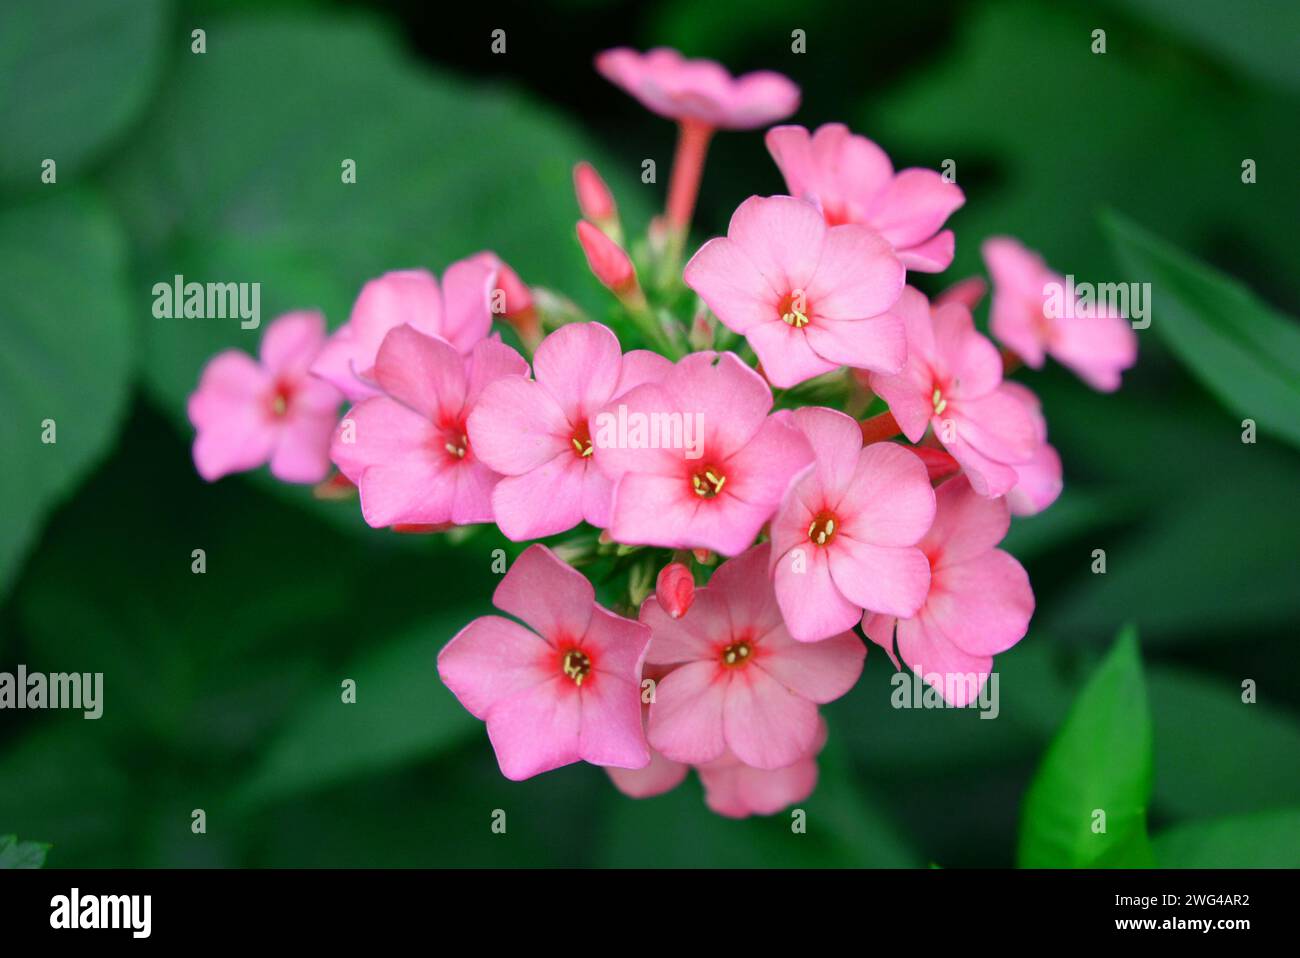 Art photo of beautiful and diverse phlox flowers in interesting colors and an unusual palette. Flowering flower buds flock that grow in the garden. Stock Photo